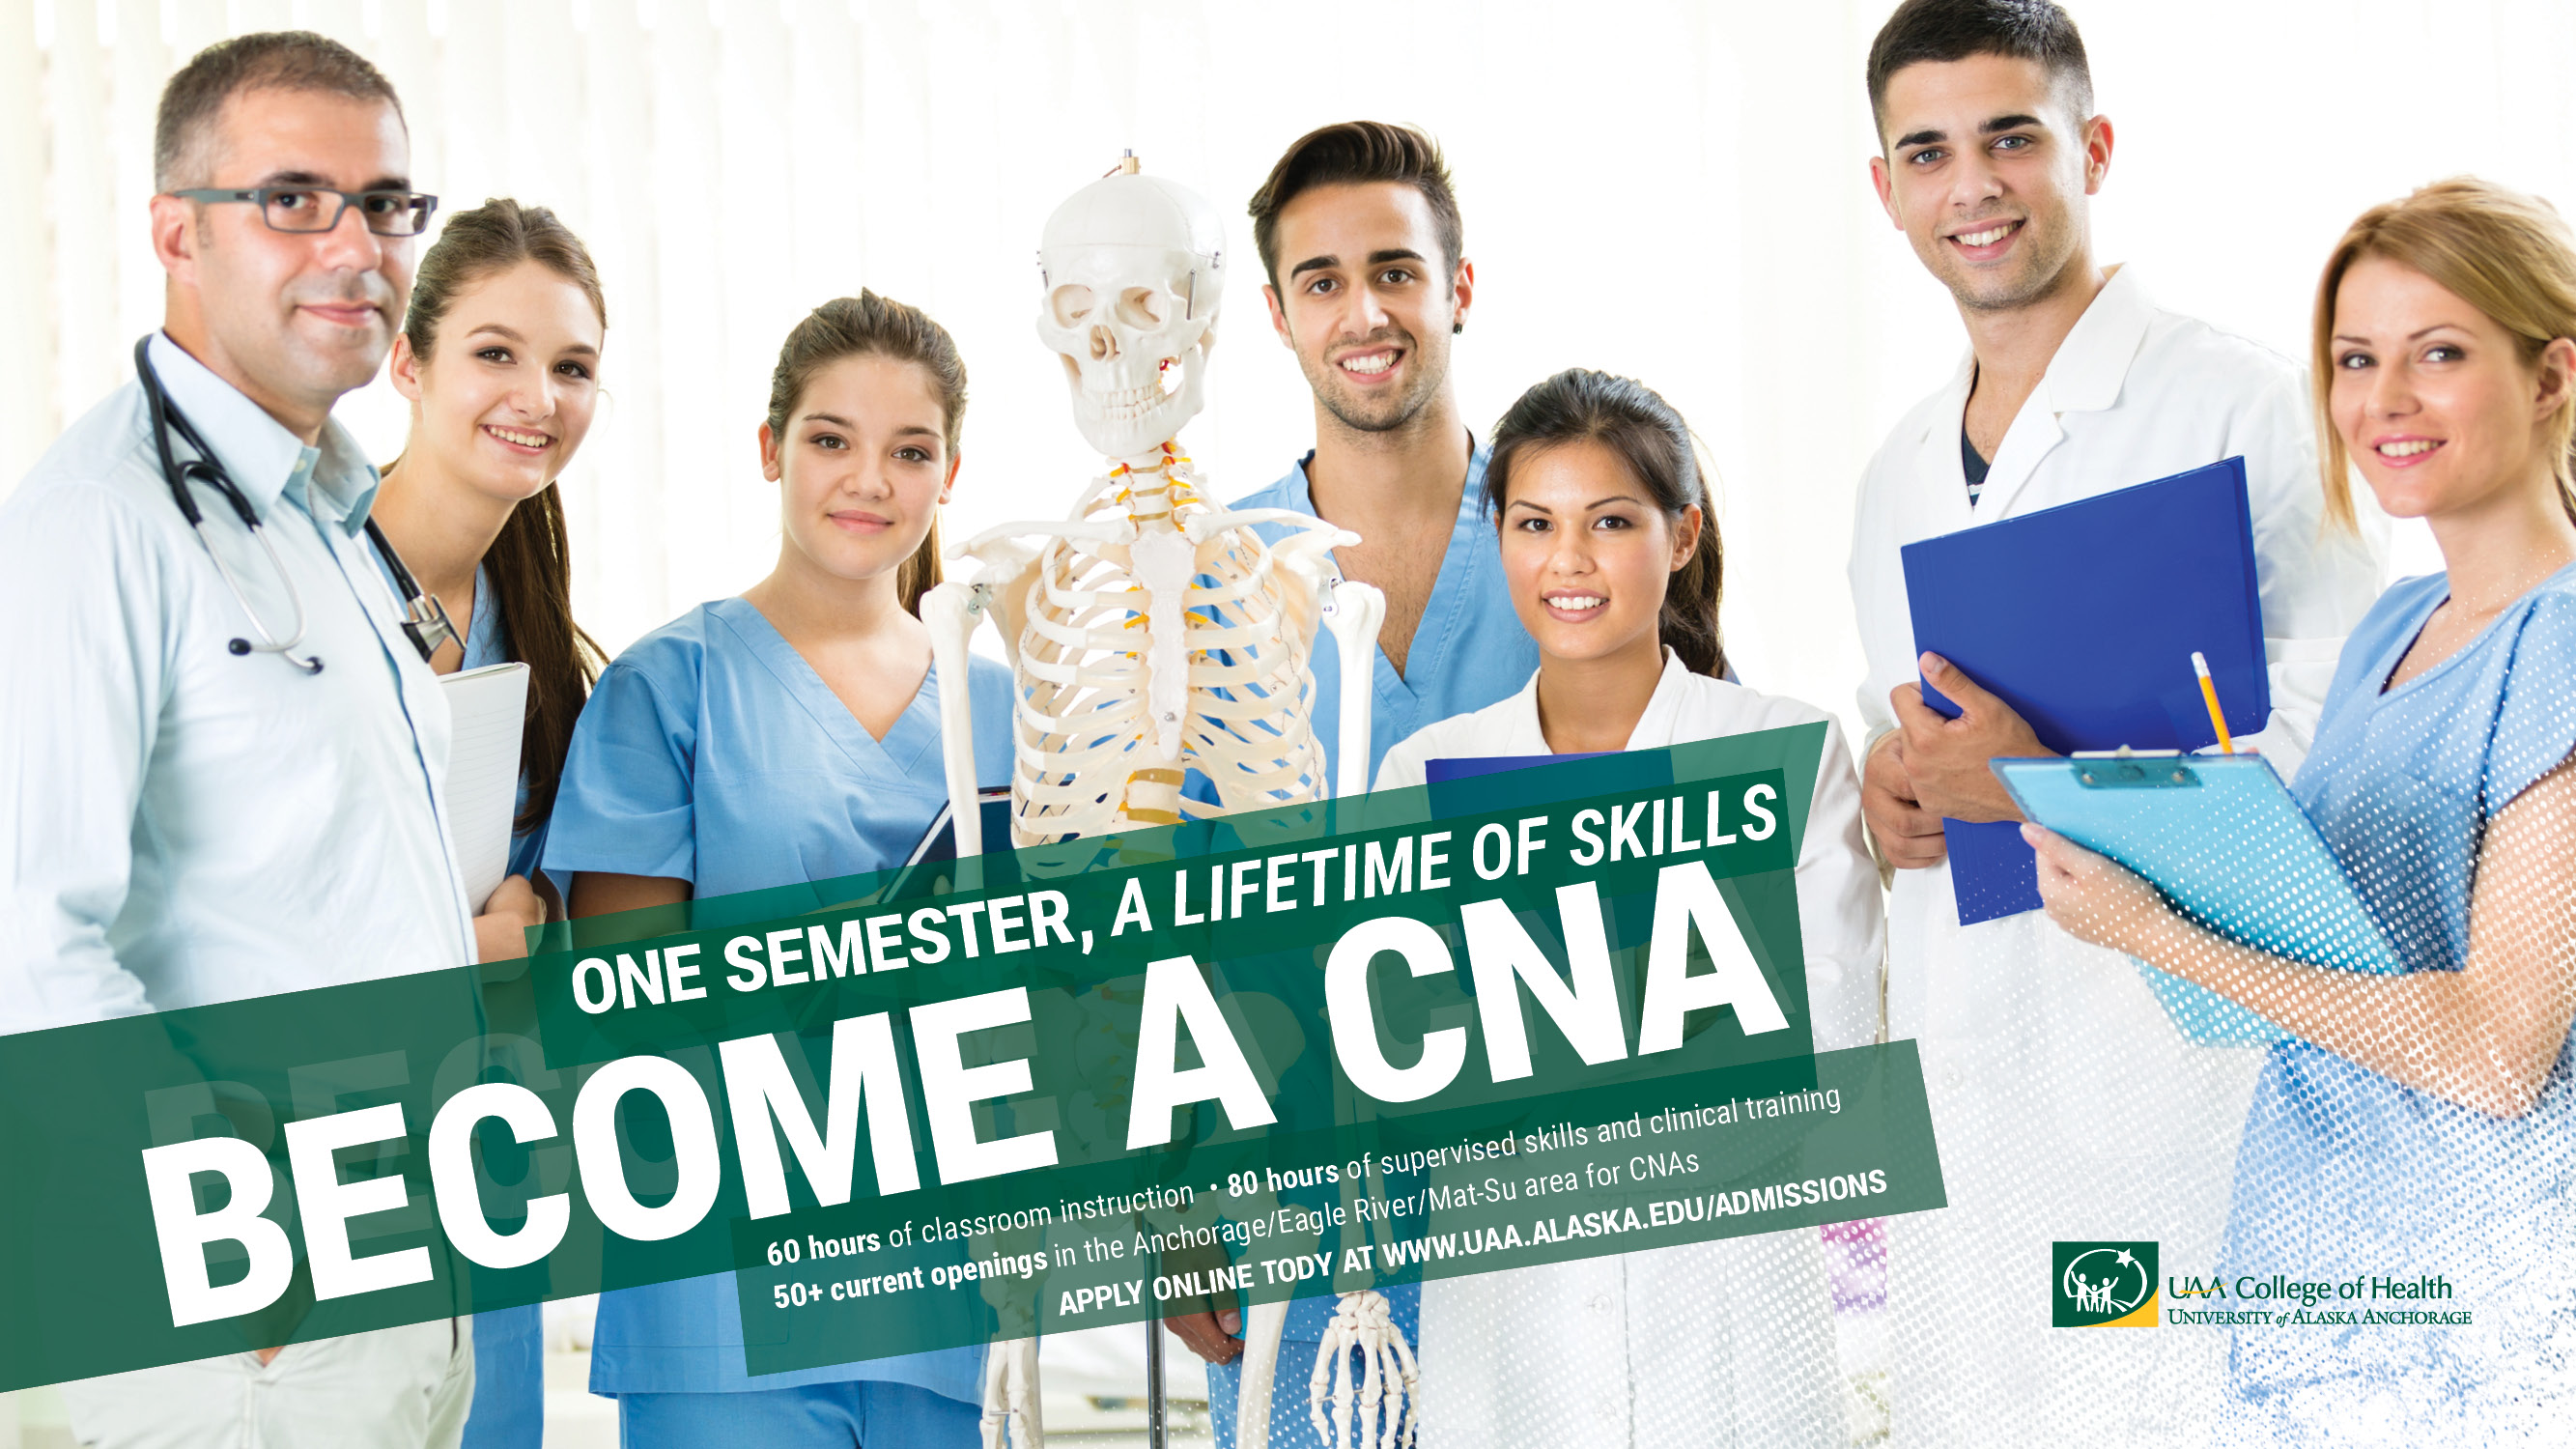 Photo of nursing students with caption "One semester, a lifetime of skills. Become a CNA. Apply online today."